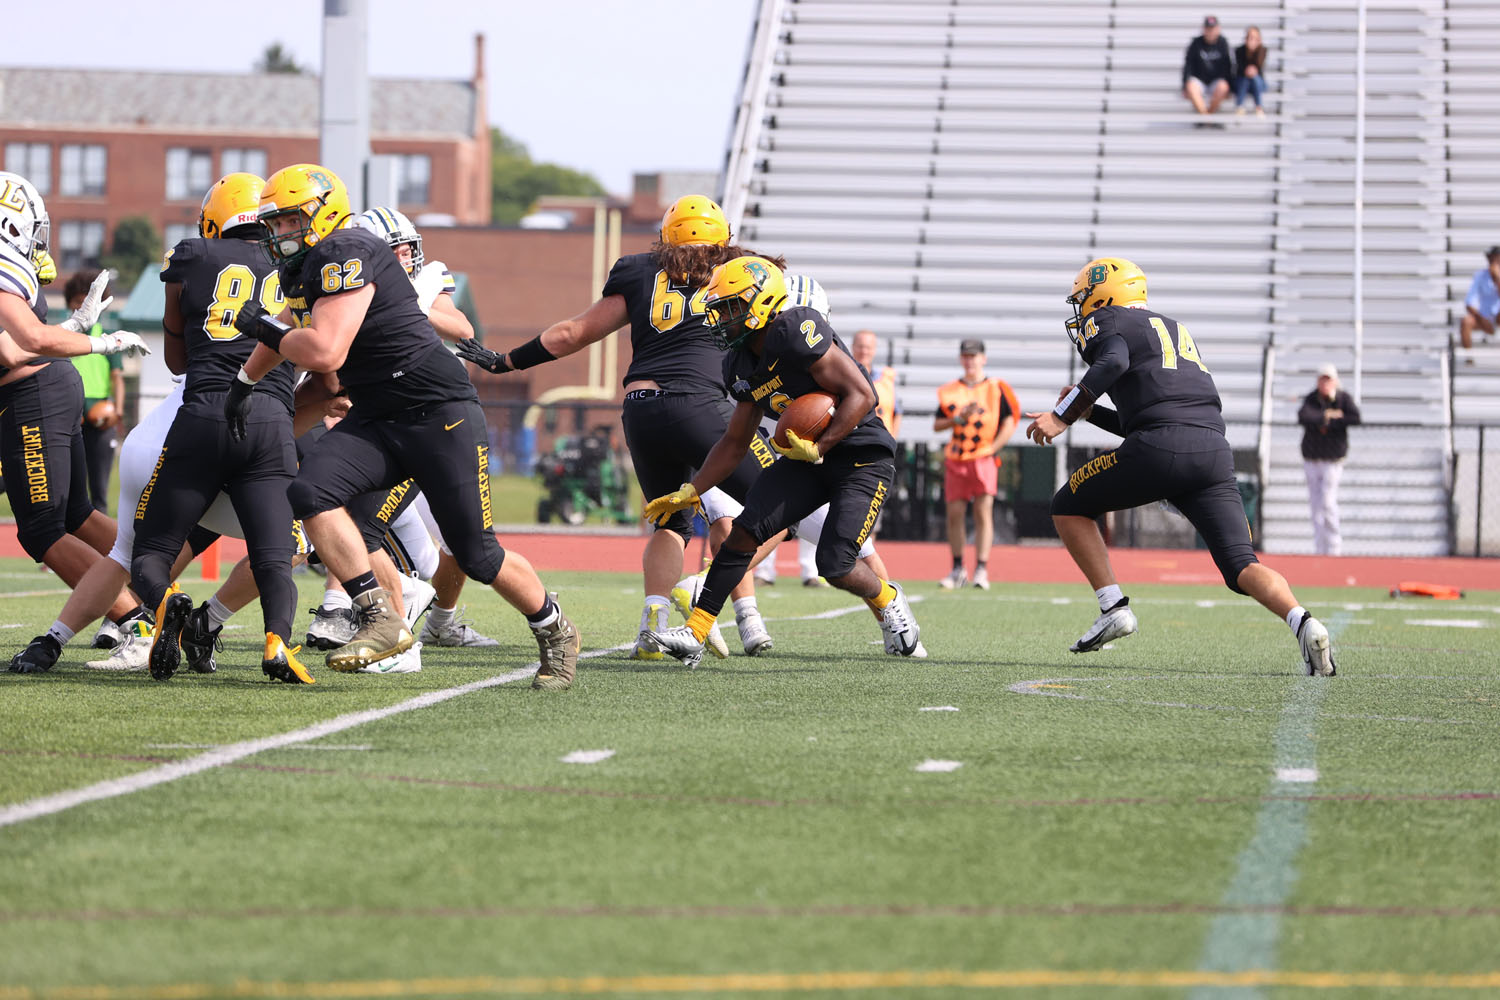 Brockport RB looking for the hole in the line